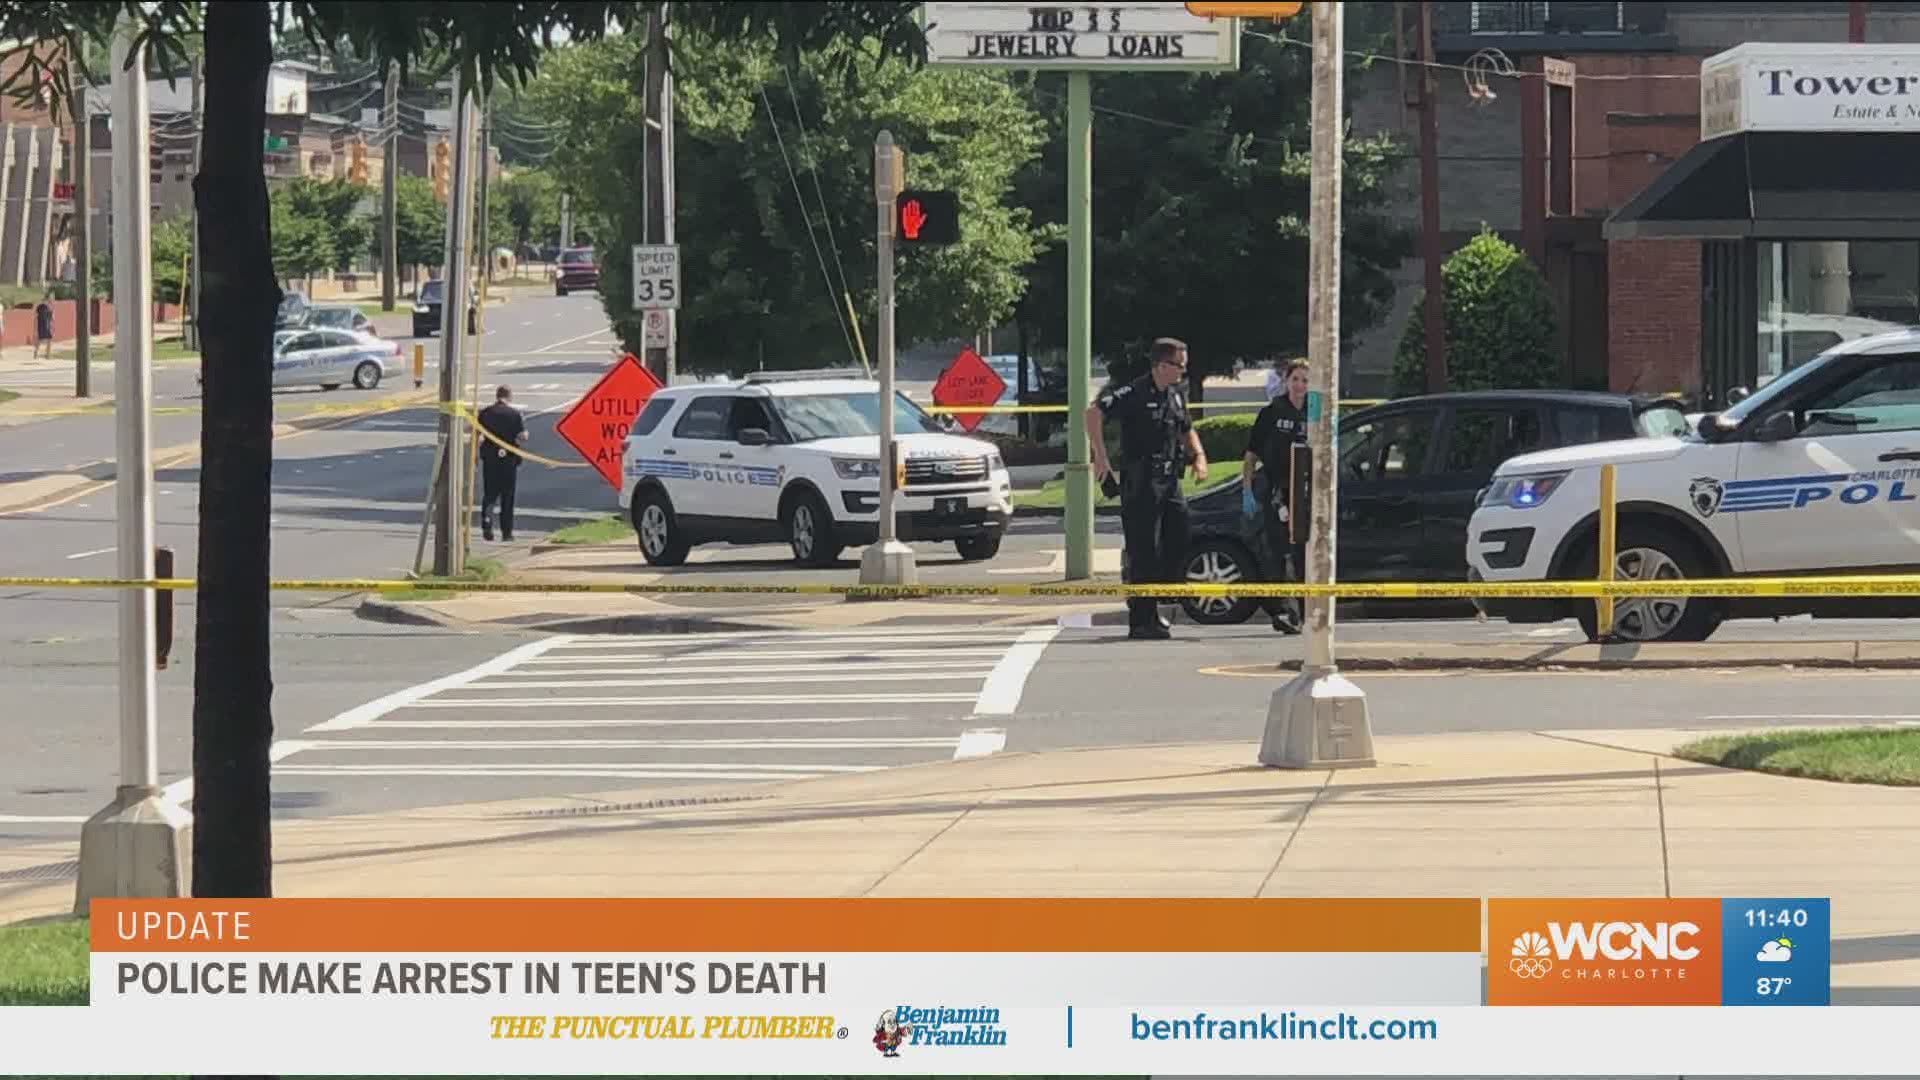 A 30-year-old man was arrested in connection with the shooting death of a 16-year-old in Charlotte's South End community on July Fourth.